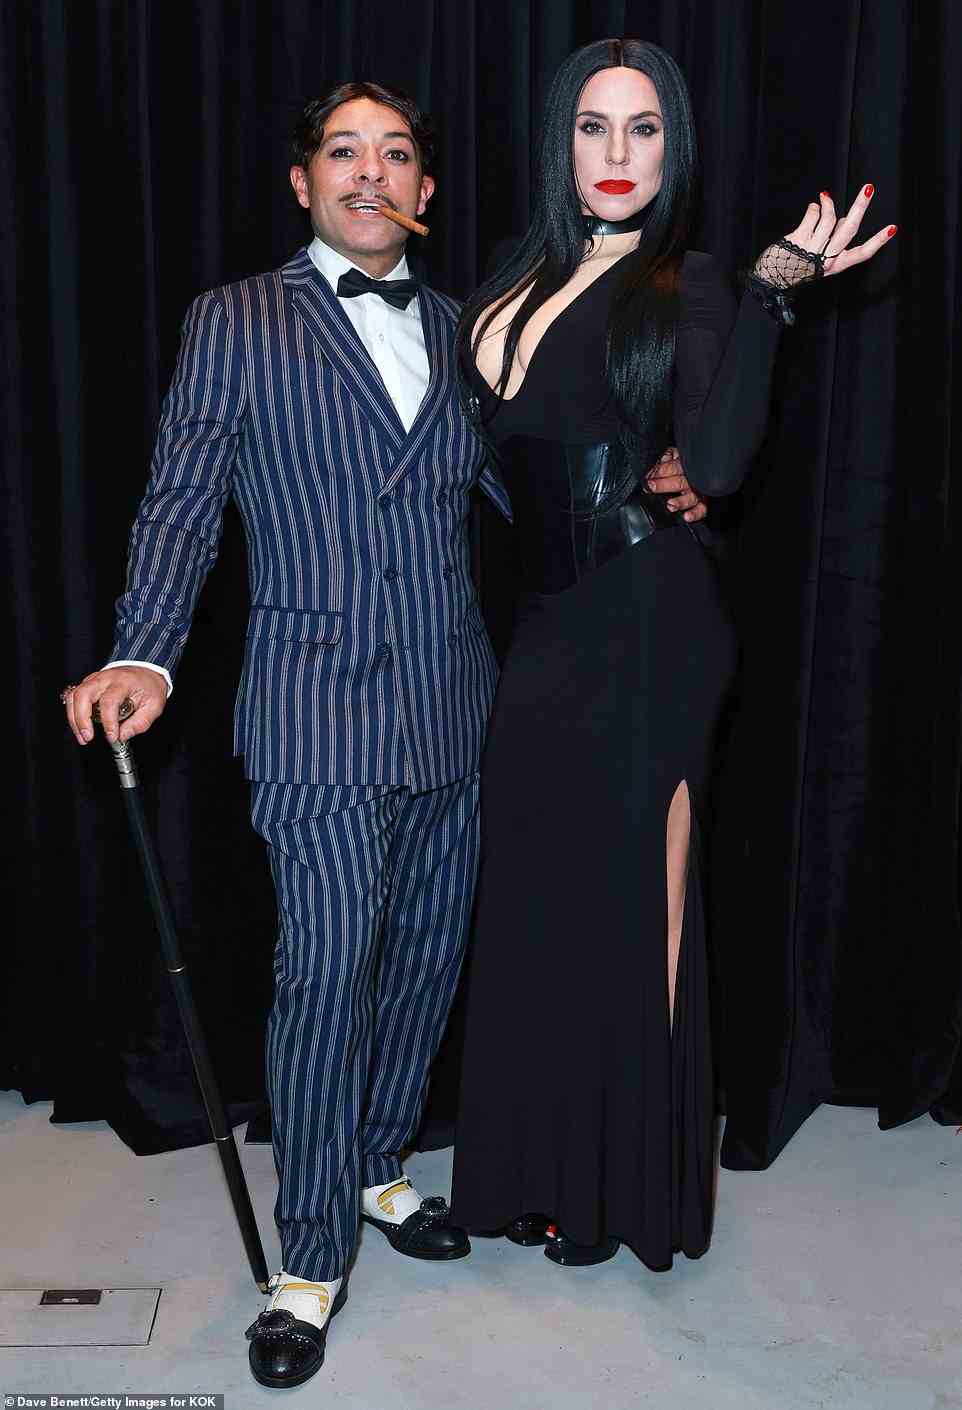 Fabulous: Spice Girl Mel C stepped out as Morticia with her Gomez Addams